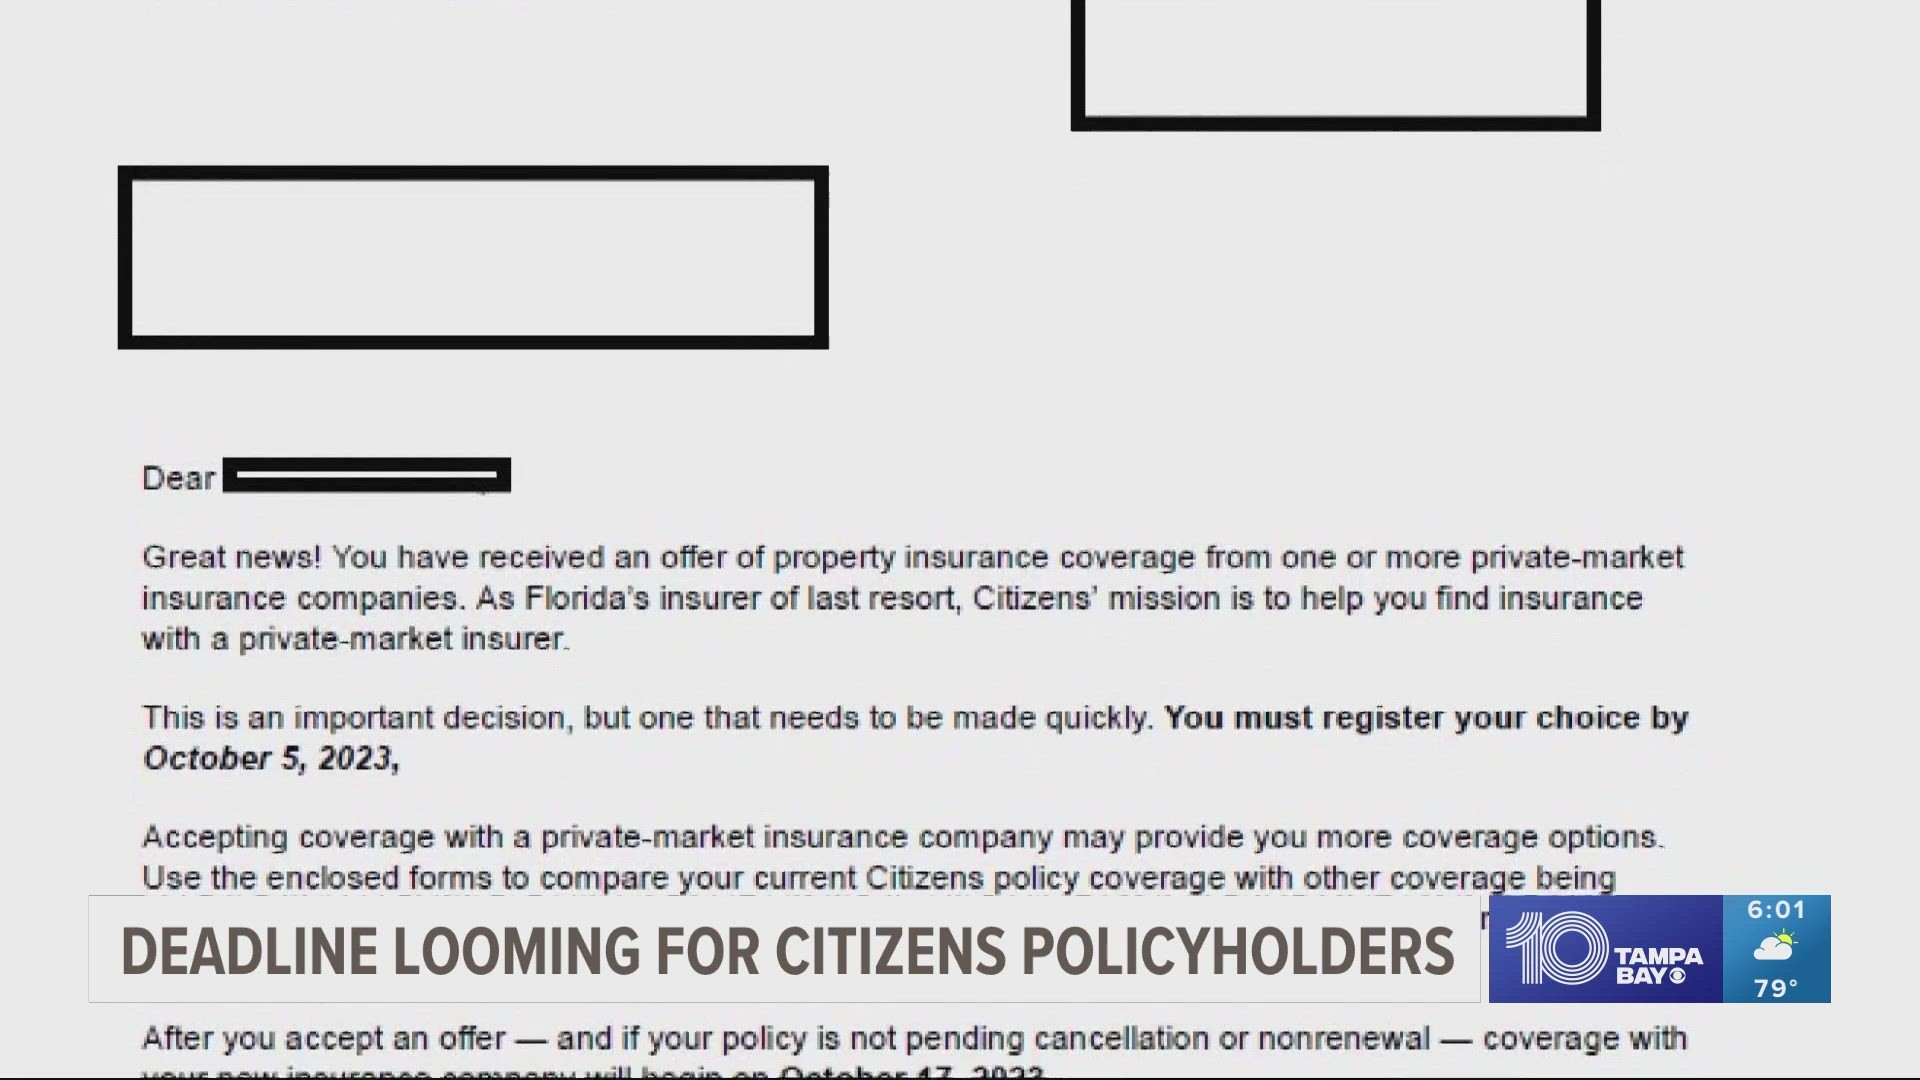 More than 300,000 Floridians who have Citizens Property Insurance received a letter that requires a response by Oct. 10.